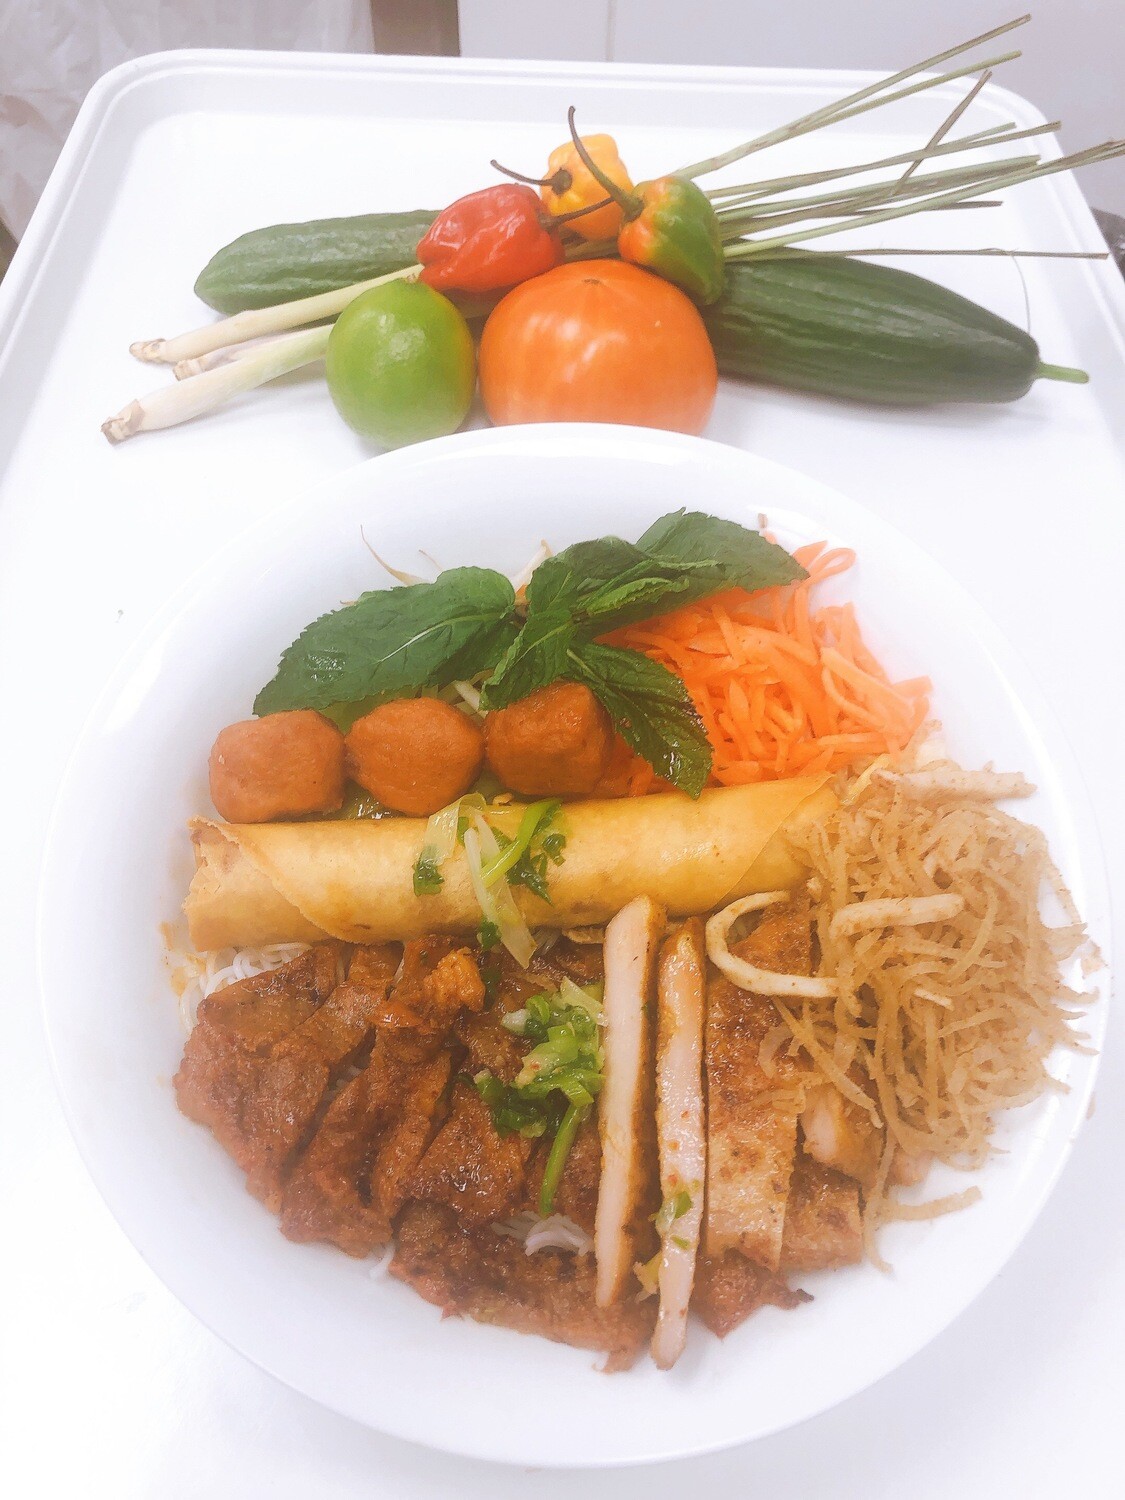 412- Vermicelli with Grilled Pork, Meatballs, Chicken, Spring Roll, and Shredded Pork Skin